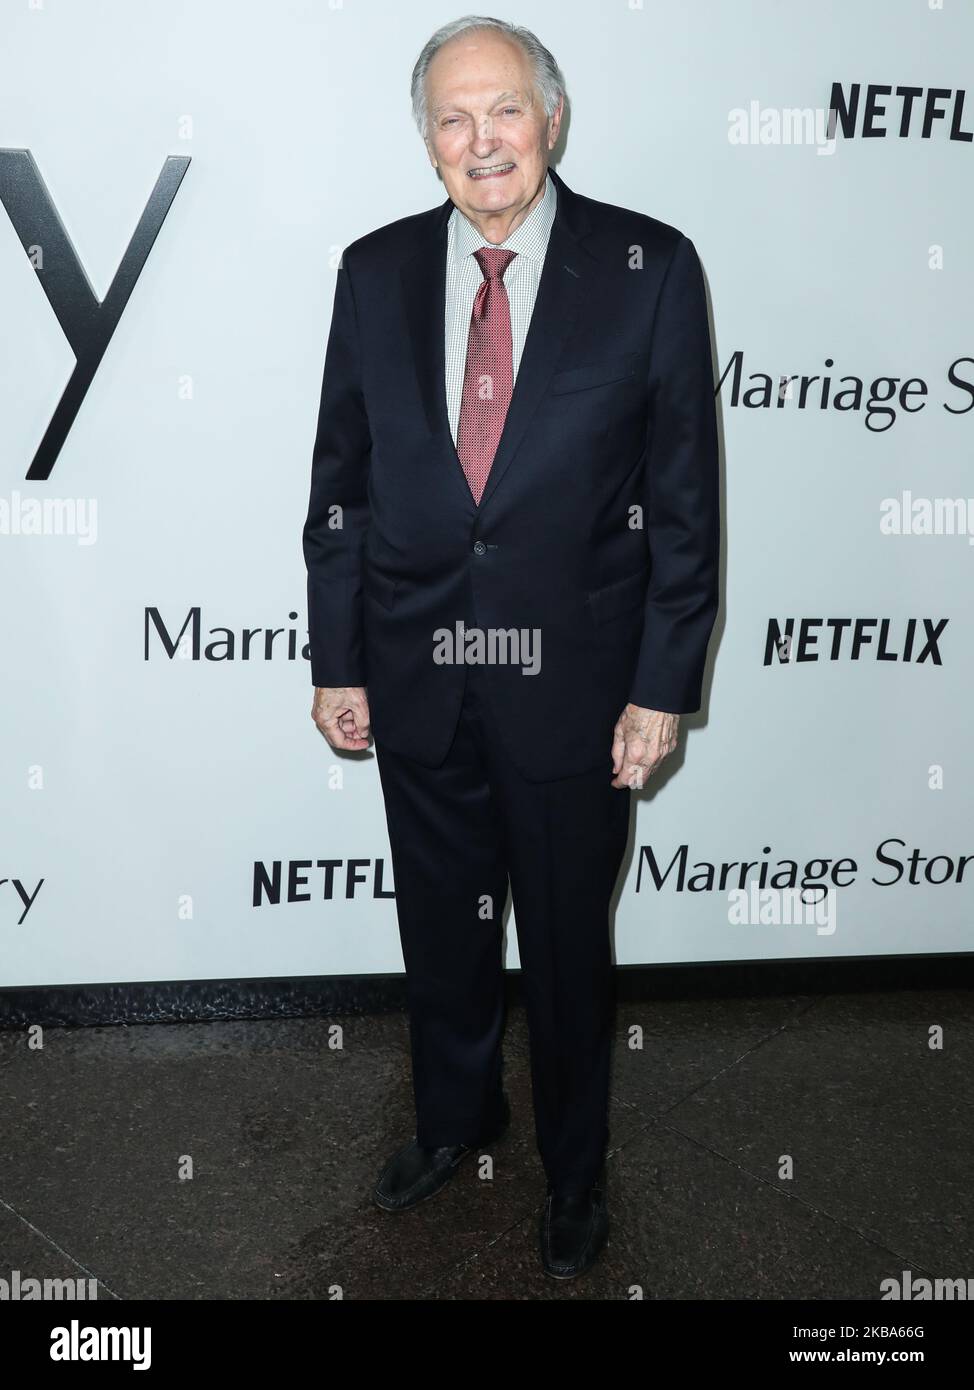 WEST HOLLYWOOD, LOS ANGELES, CALIFORNIA, USA - NOVEMBER 05: Actor Alan Alda arrives at the Los Angeles Premiere Of Netflix's 'Marriage Story' held at the Directors Guild of America Theater on November 5, 2019 in West Hollywood, Los Angeles, California, United States. (Photo by Xavier Collin/Image Press Agency/NurPhoto) Stock Photo